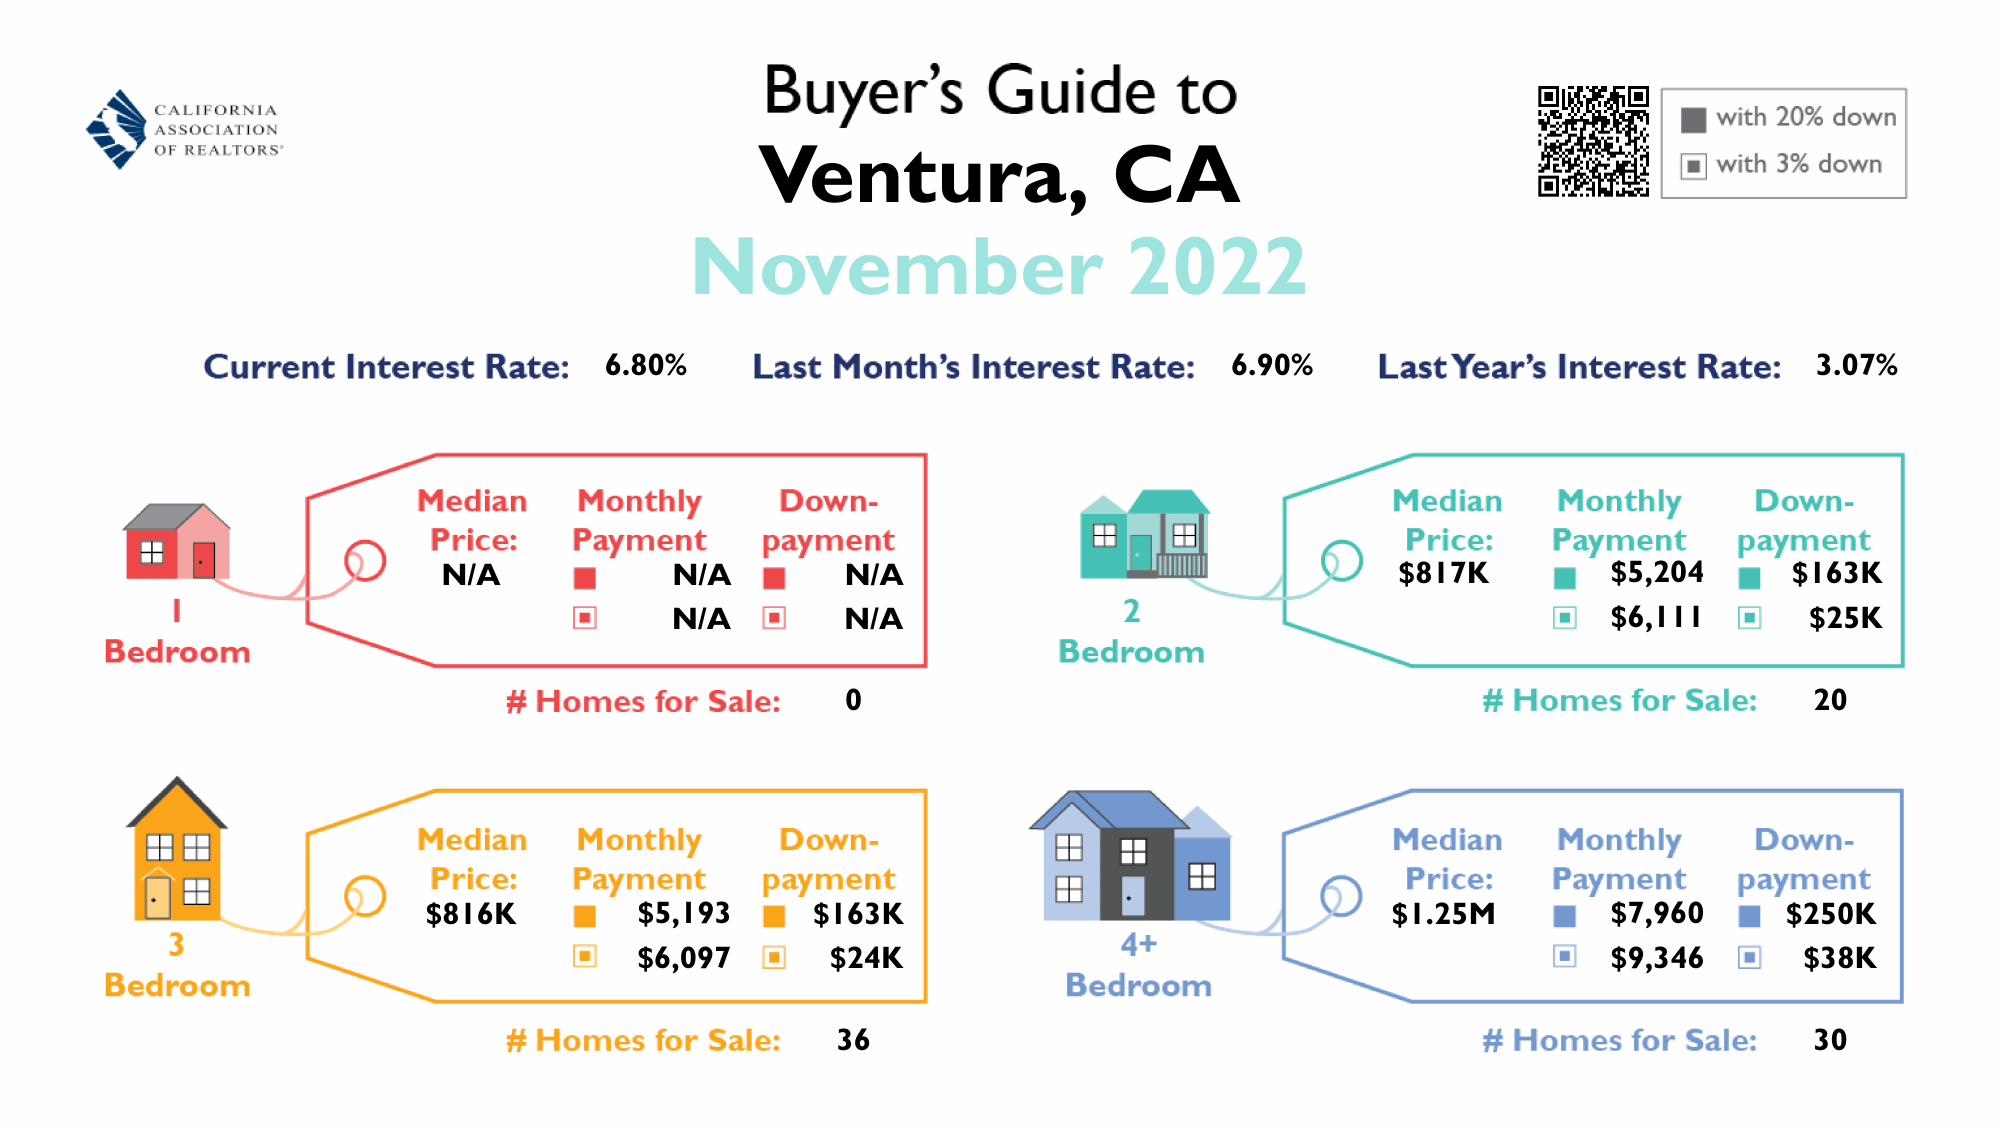 City of Ventura Monthly Real Estate Buyers Guide